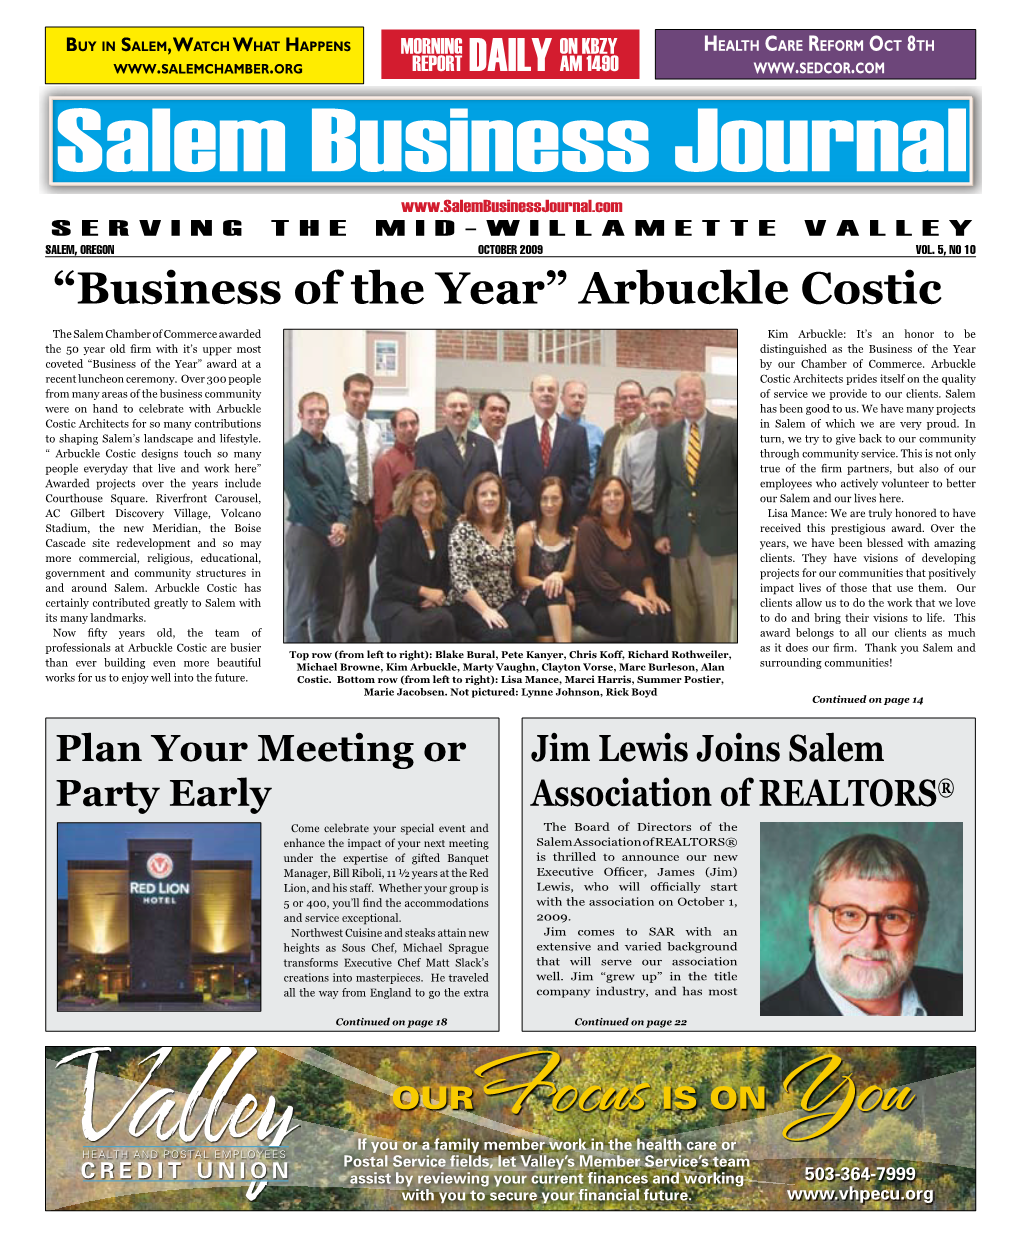 “Business of the Year” Arbuckle Costic